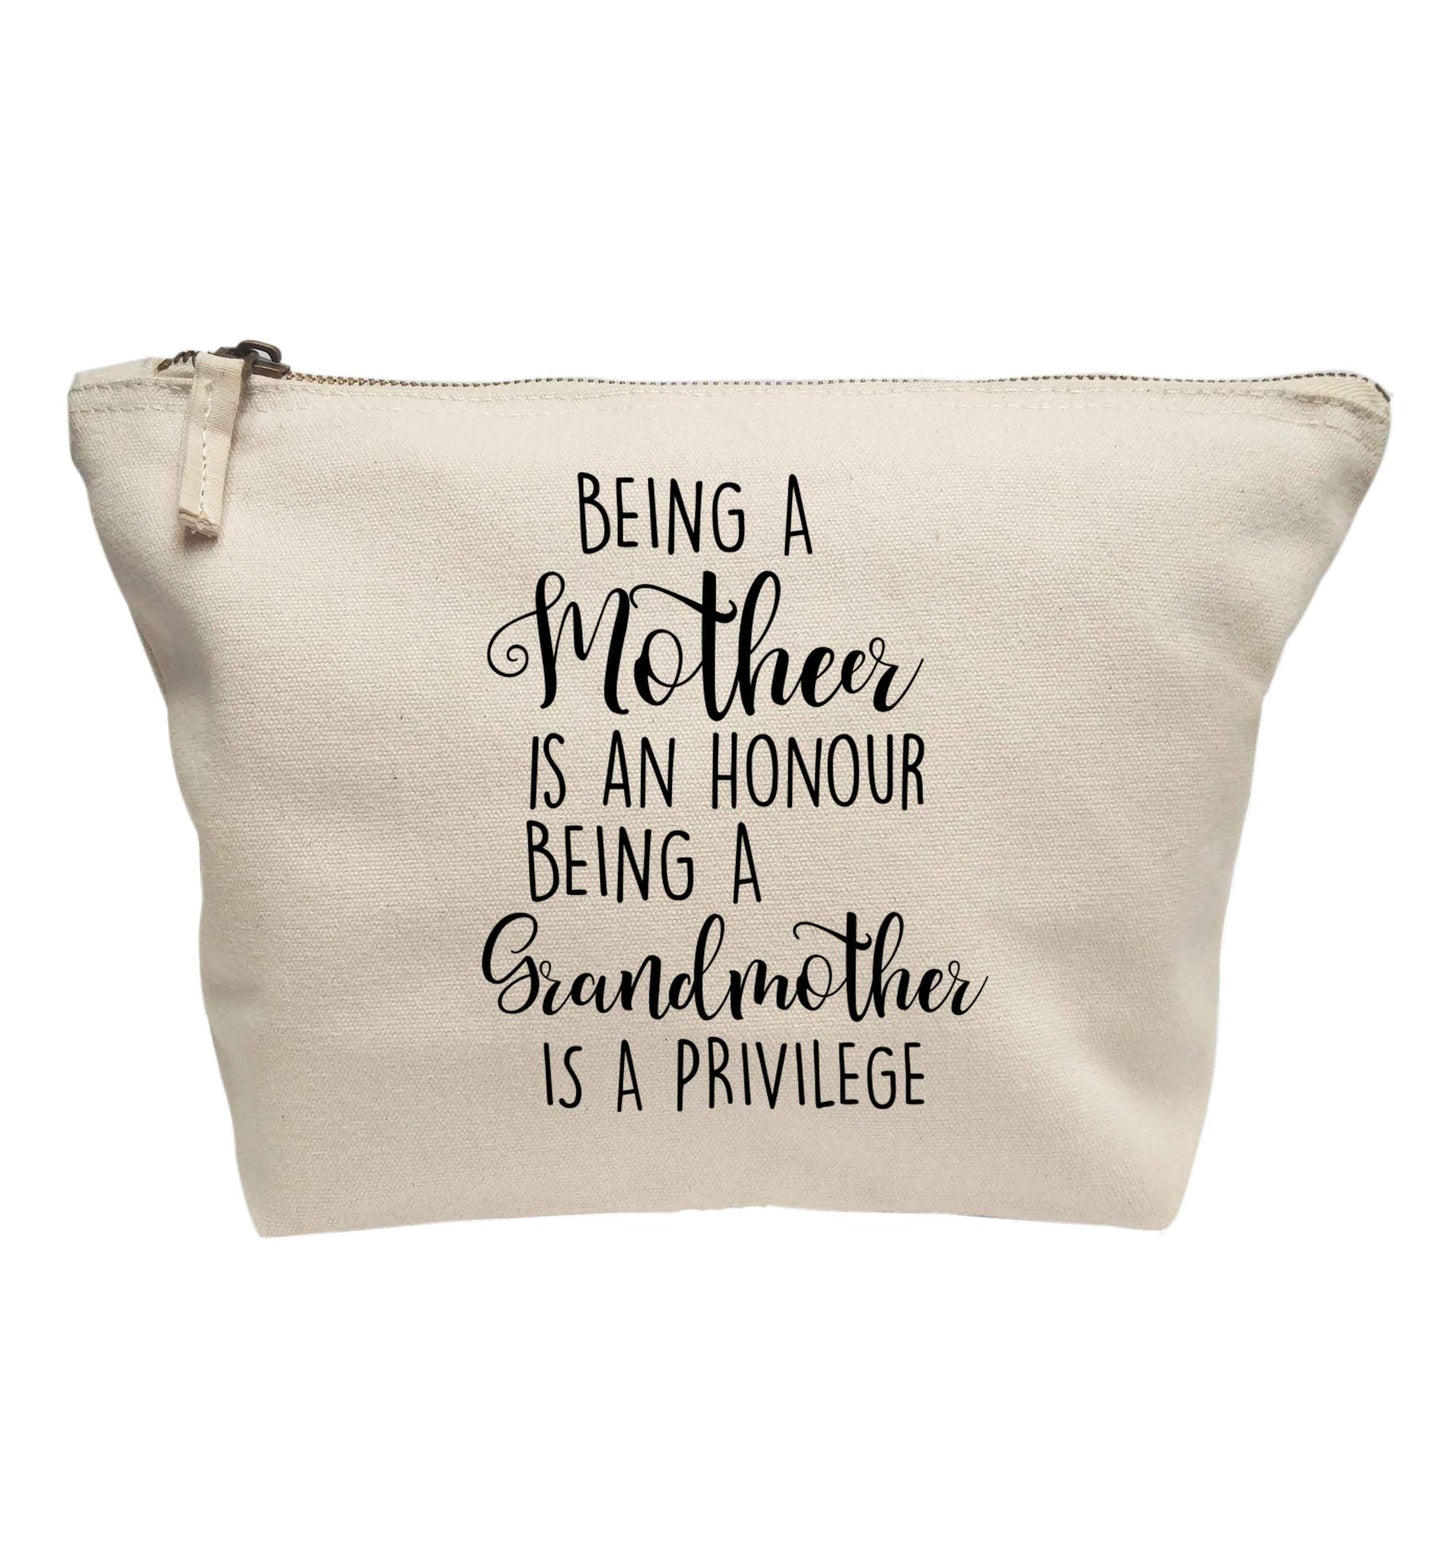 Being a mother is an honour being an grandmother is a privilege | makeup / wash bag